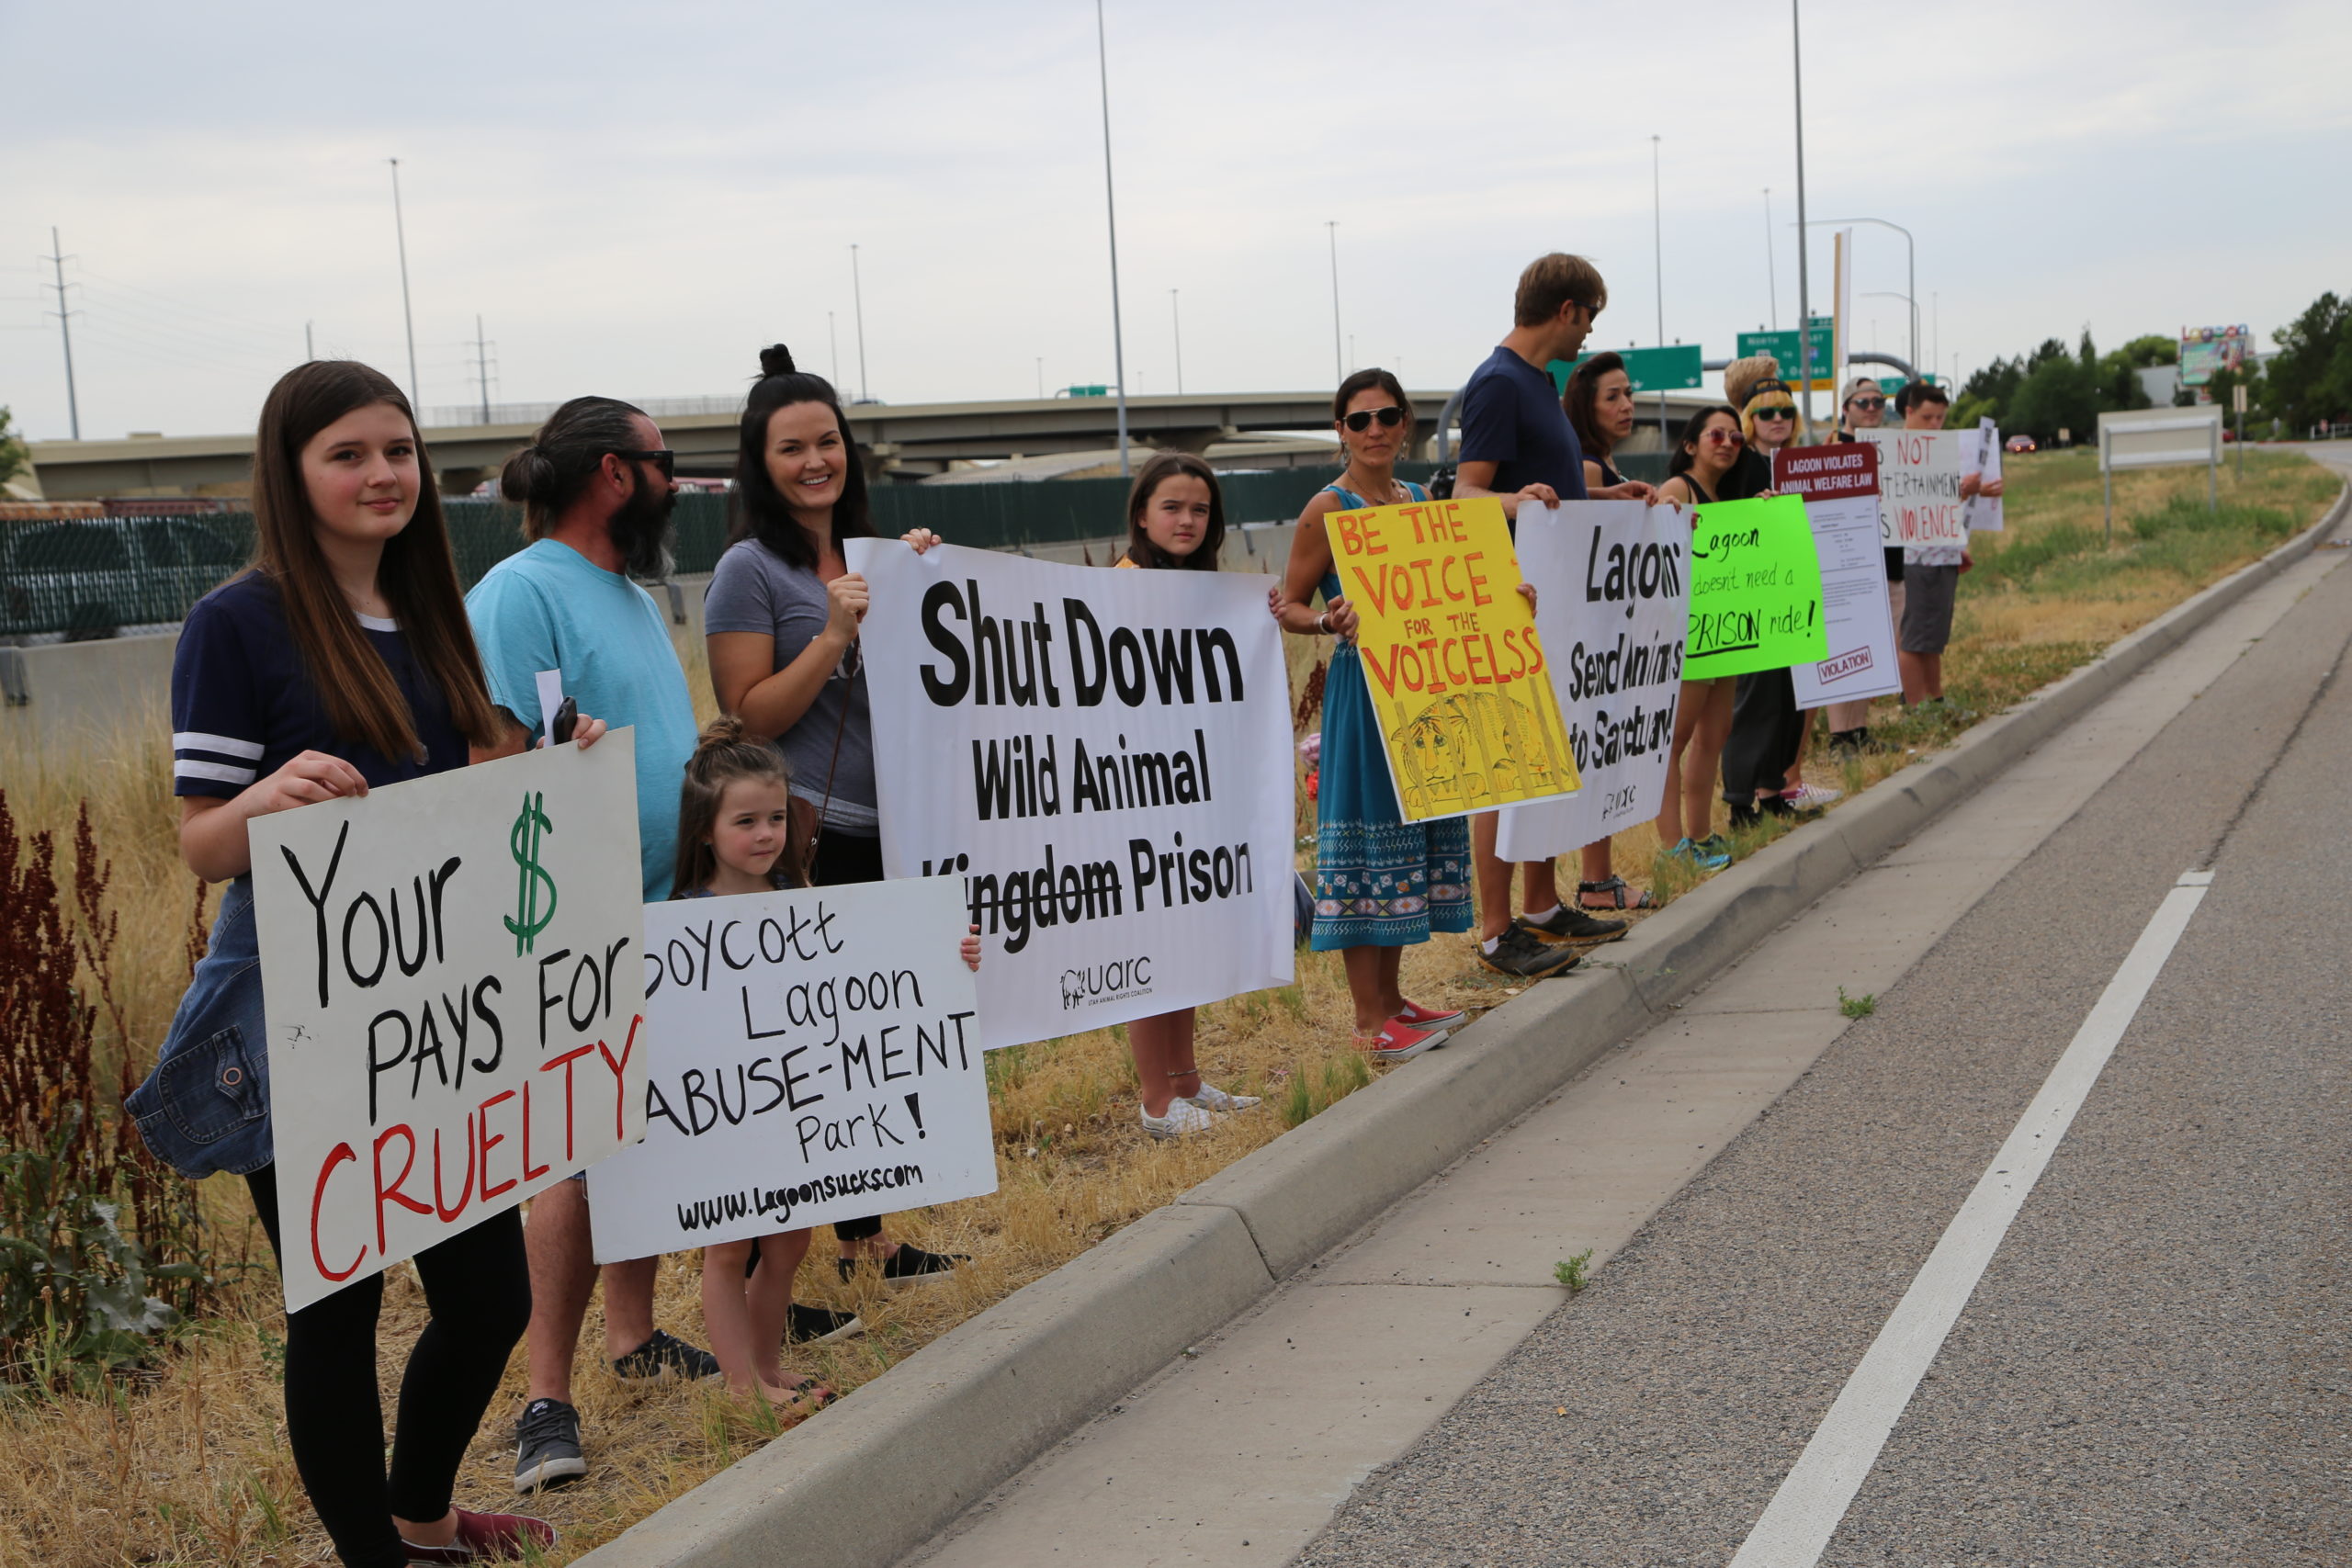 NEWS RELEASE: Dozens of Animal Rights Protesters Expected to Descend on Lagoon Amusement Park